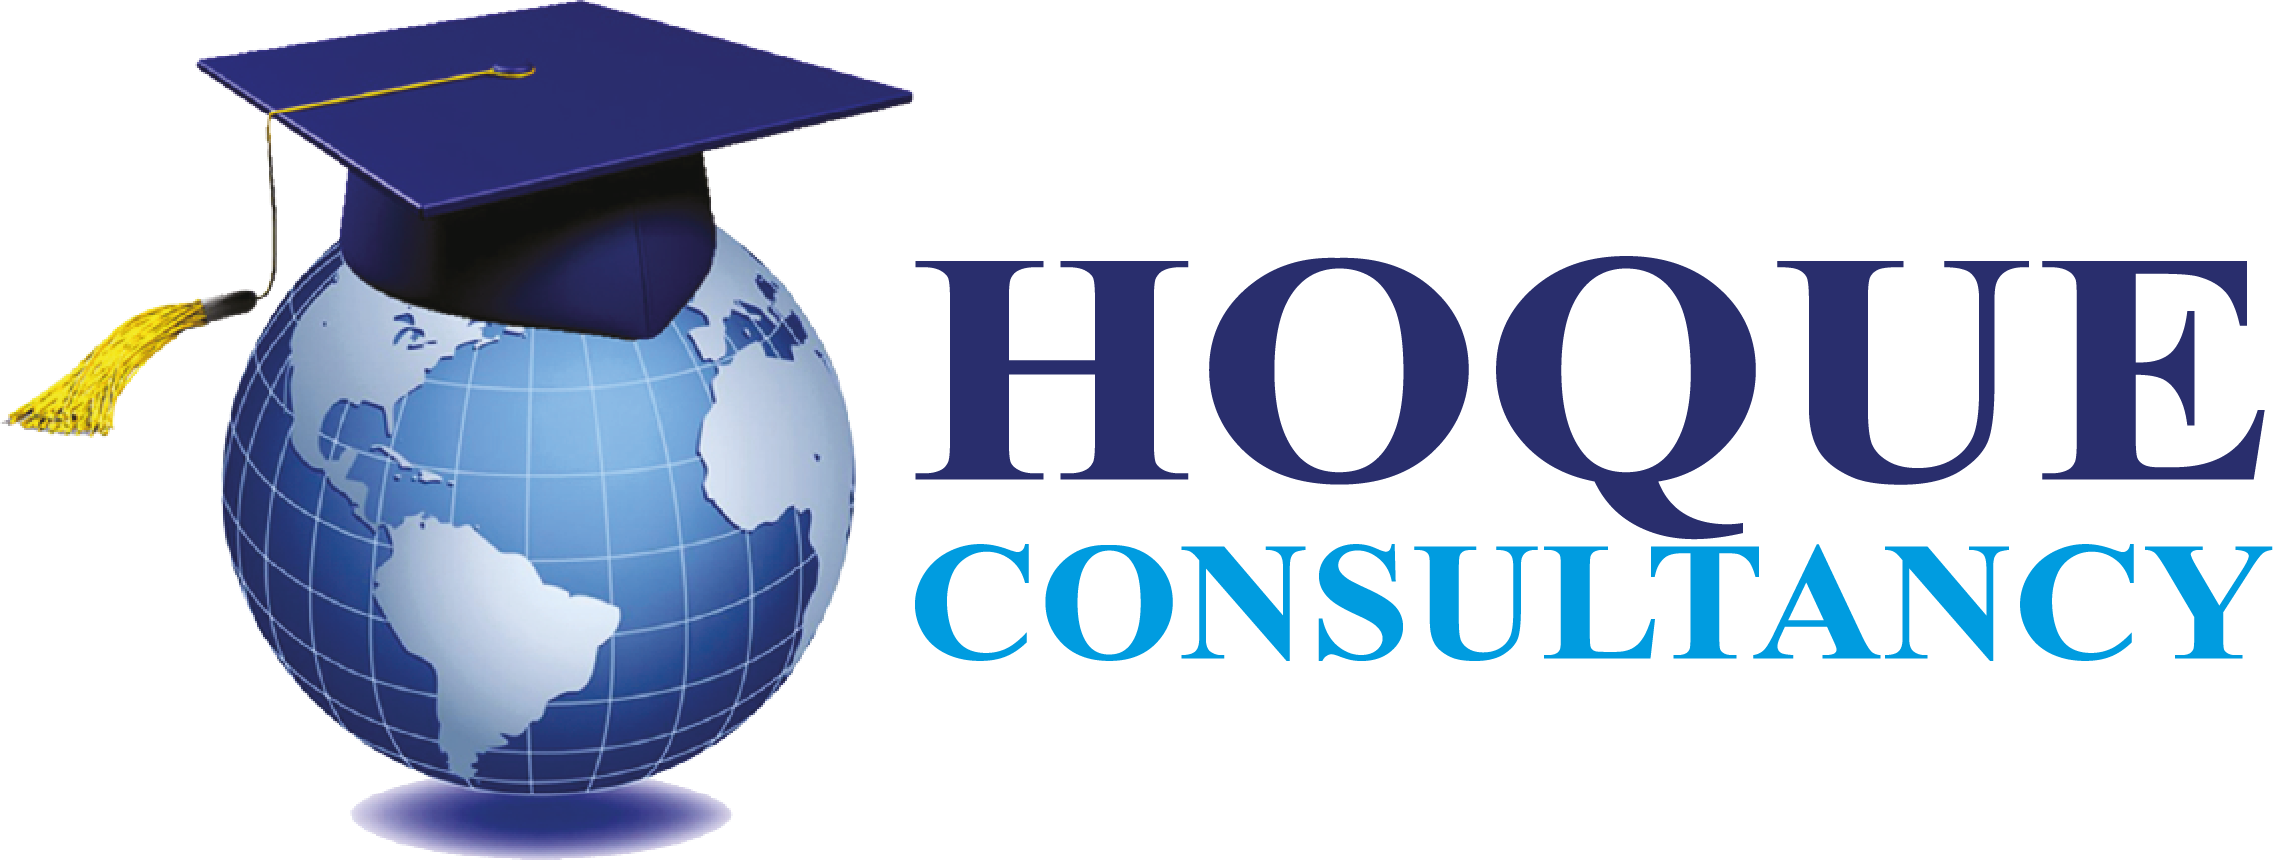 Hoque Consultancy Take Your Education To A Higher Level